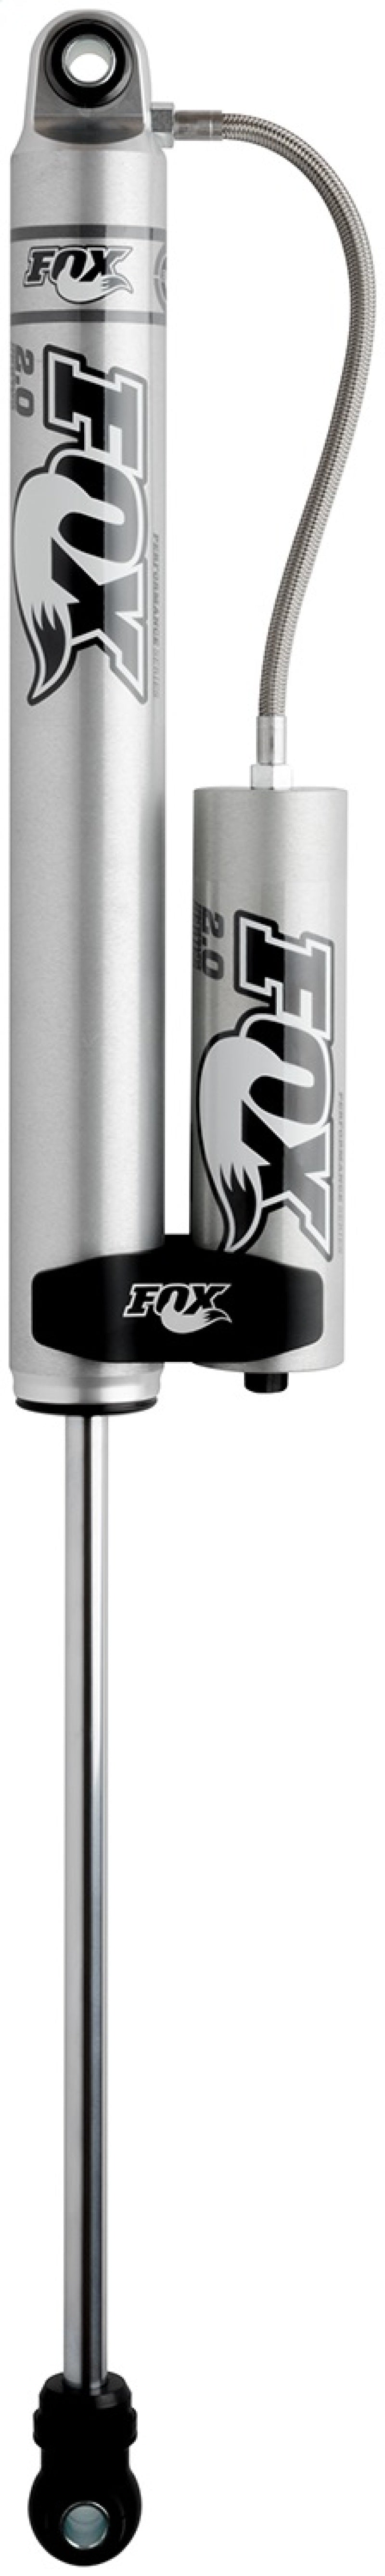 Fox 99+ Chevy HD 2.0 Performance Series 14.1in. Smooth Body Remote Res. Rear Shock / 7-10in. Lift